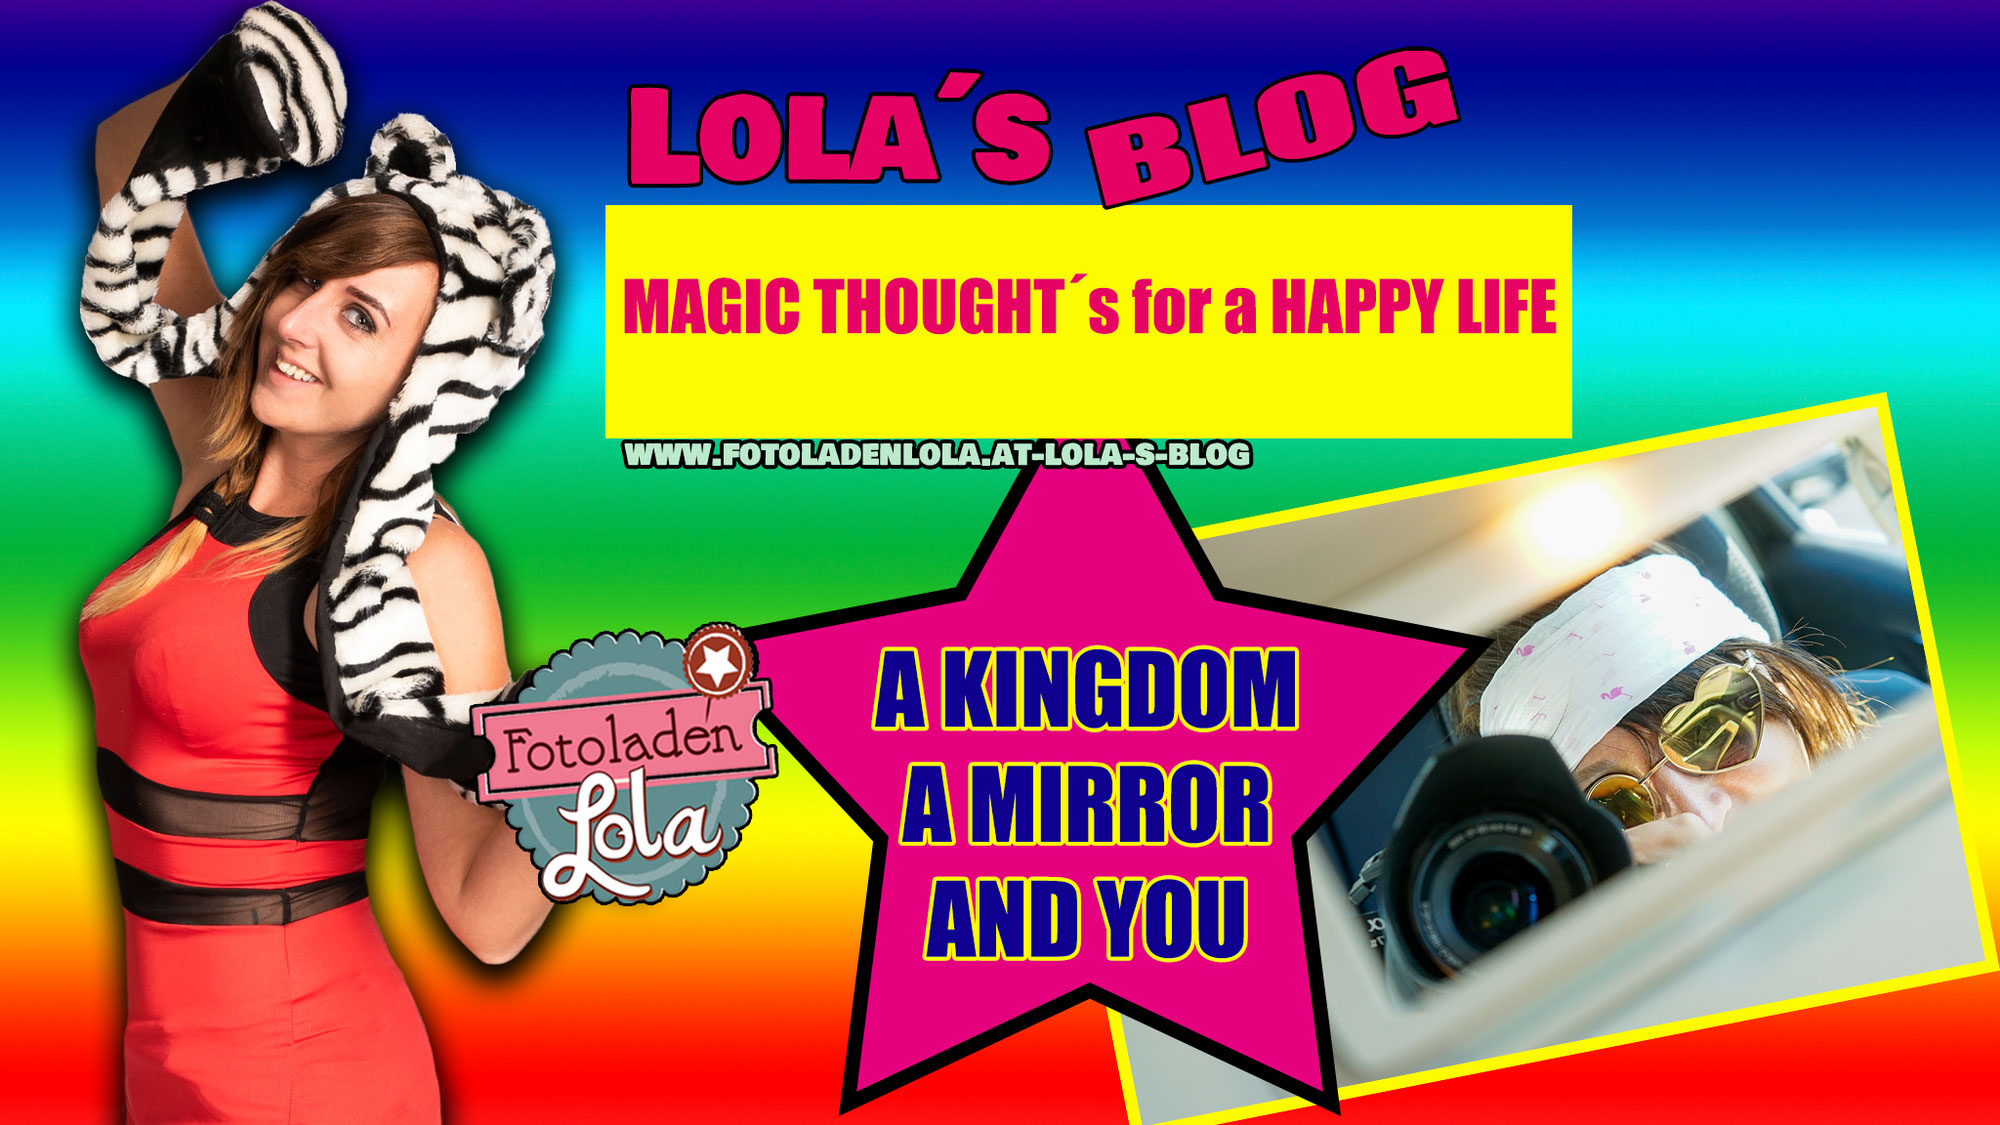 Lola´s blog in English: A KINGDOM. A MIRROR. AND SIMPLY YOU.